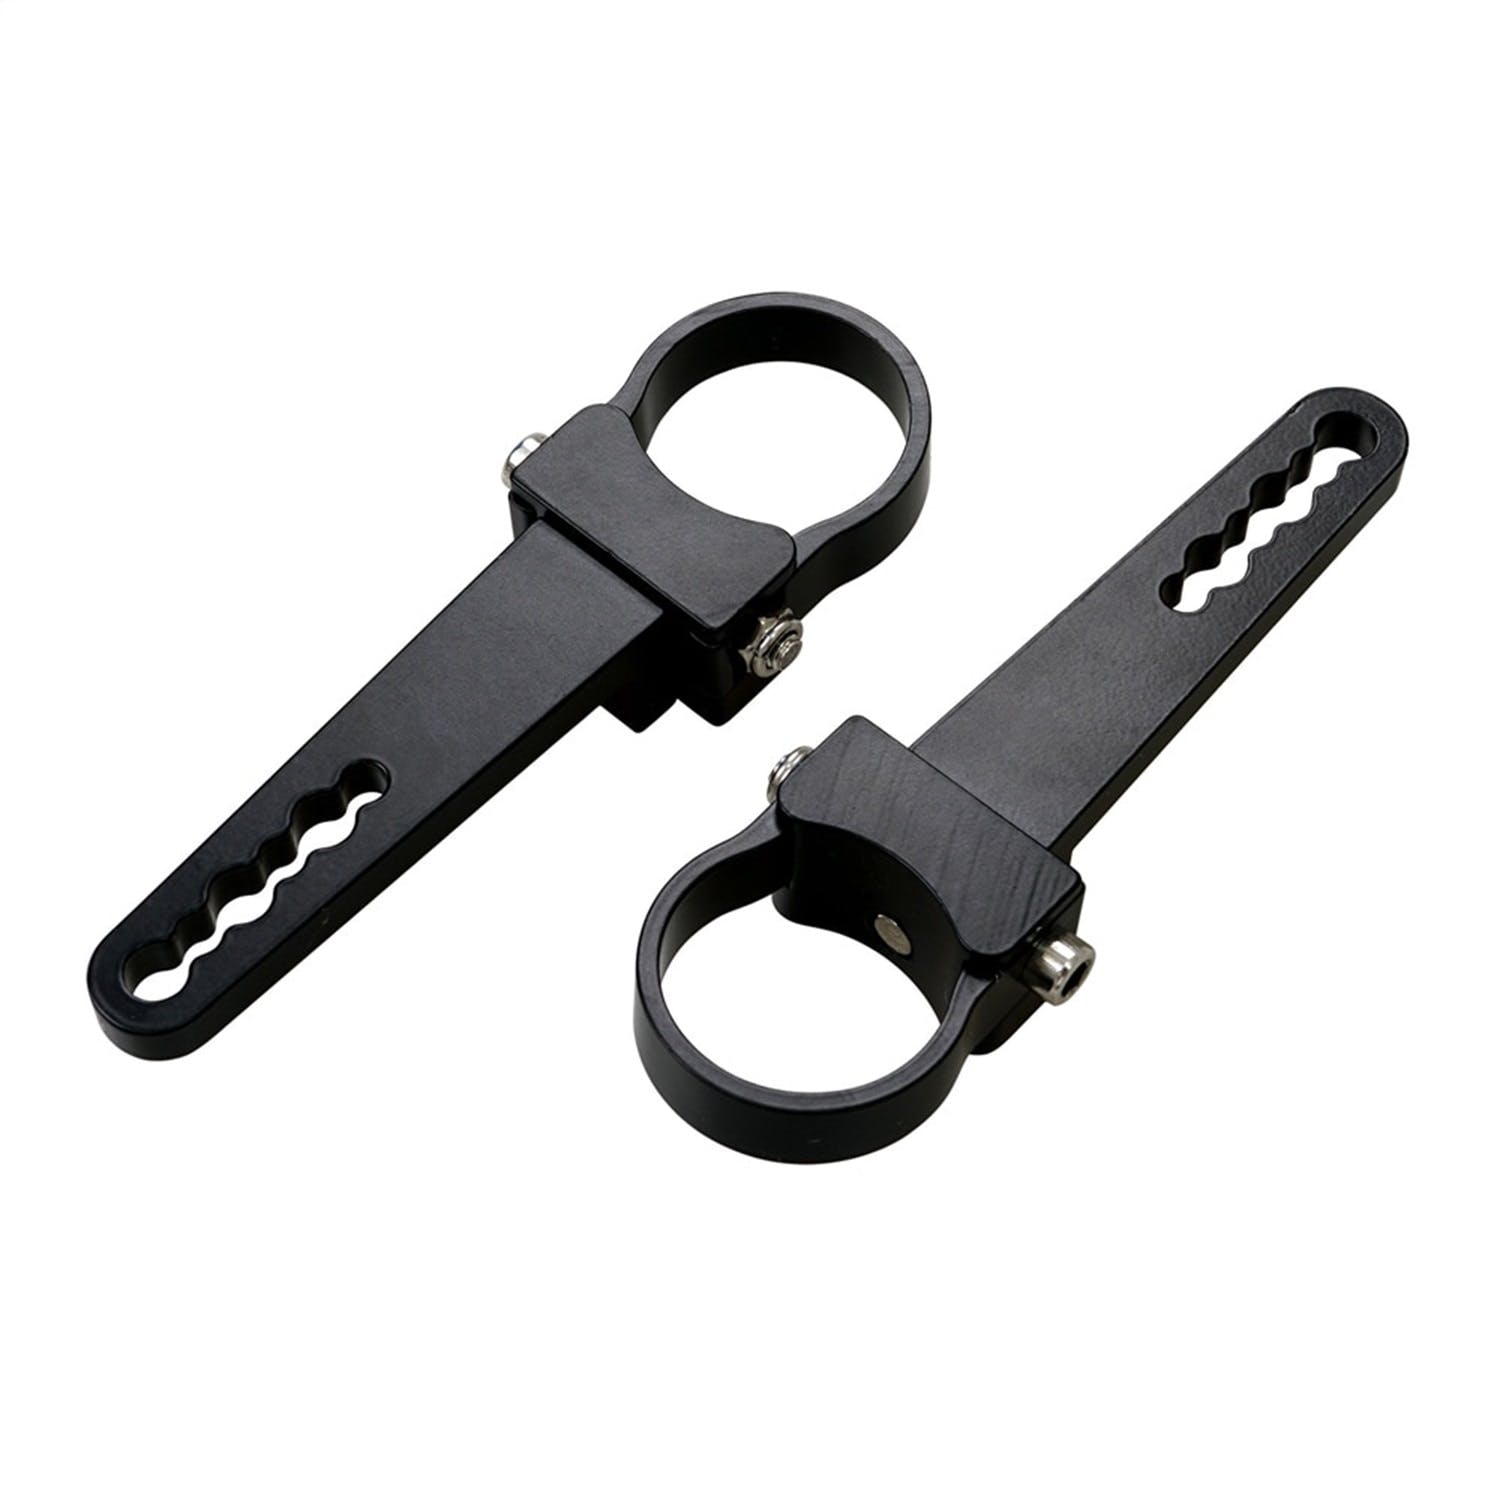 BrightSource 200125 Tube Mount Universal Fit 1.25in. w/360 degree rotation. Sold in pairs